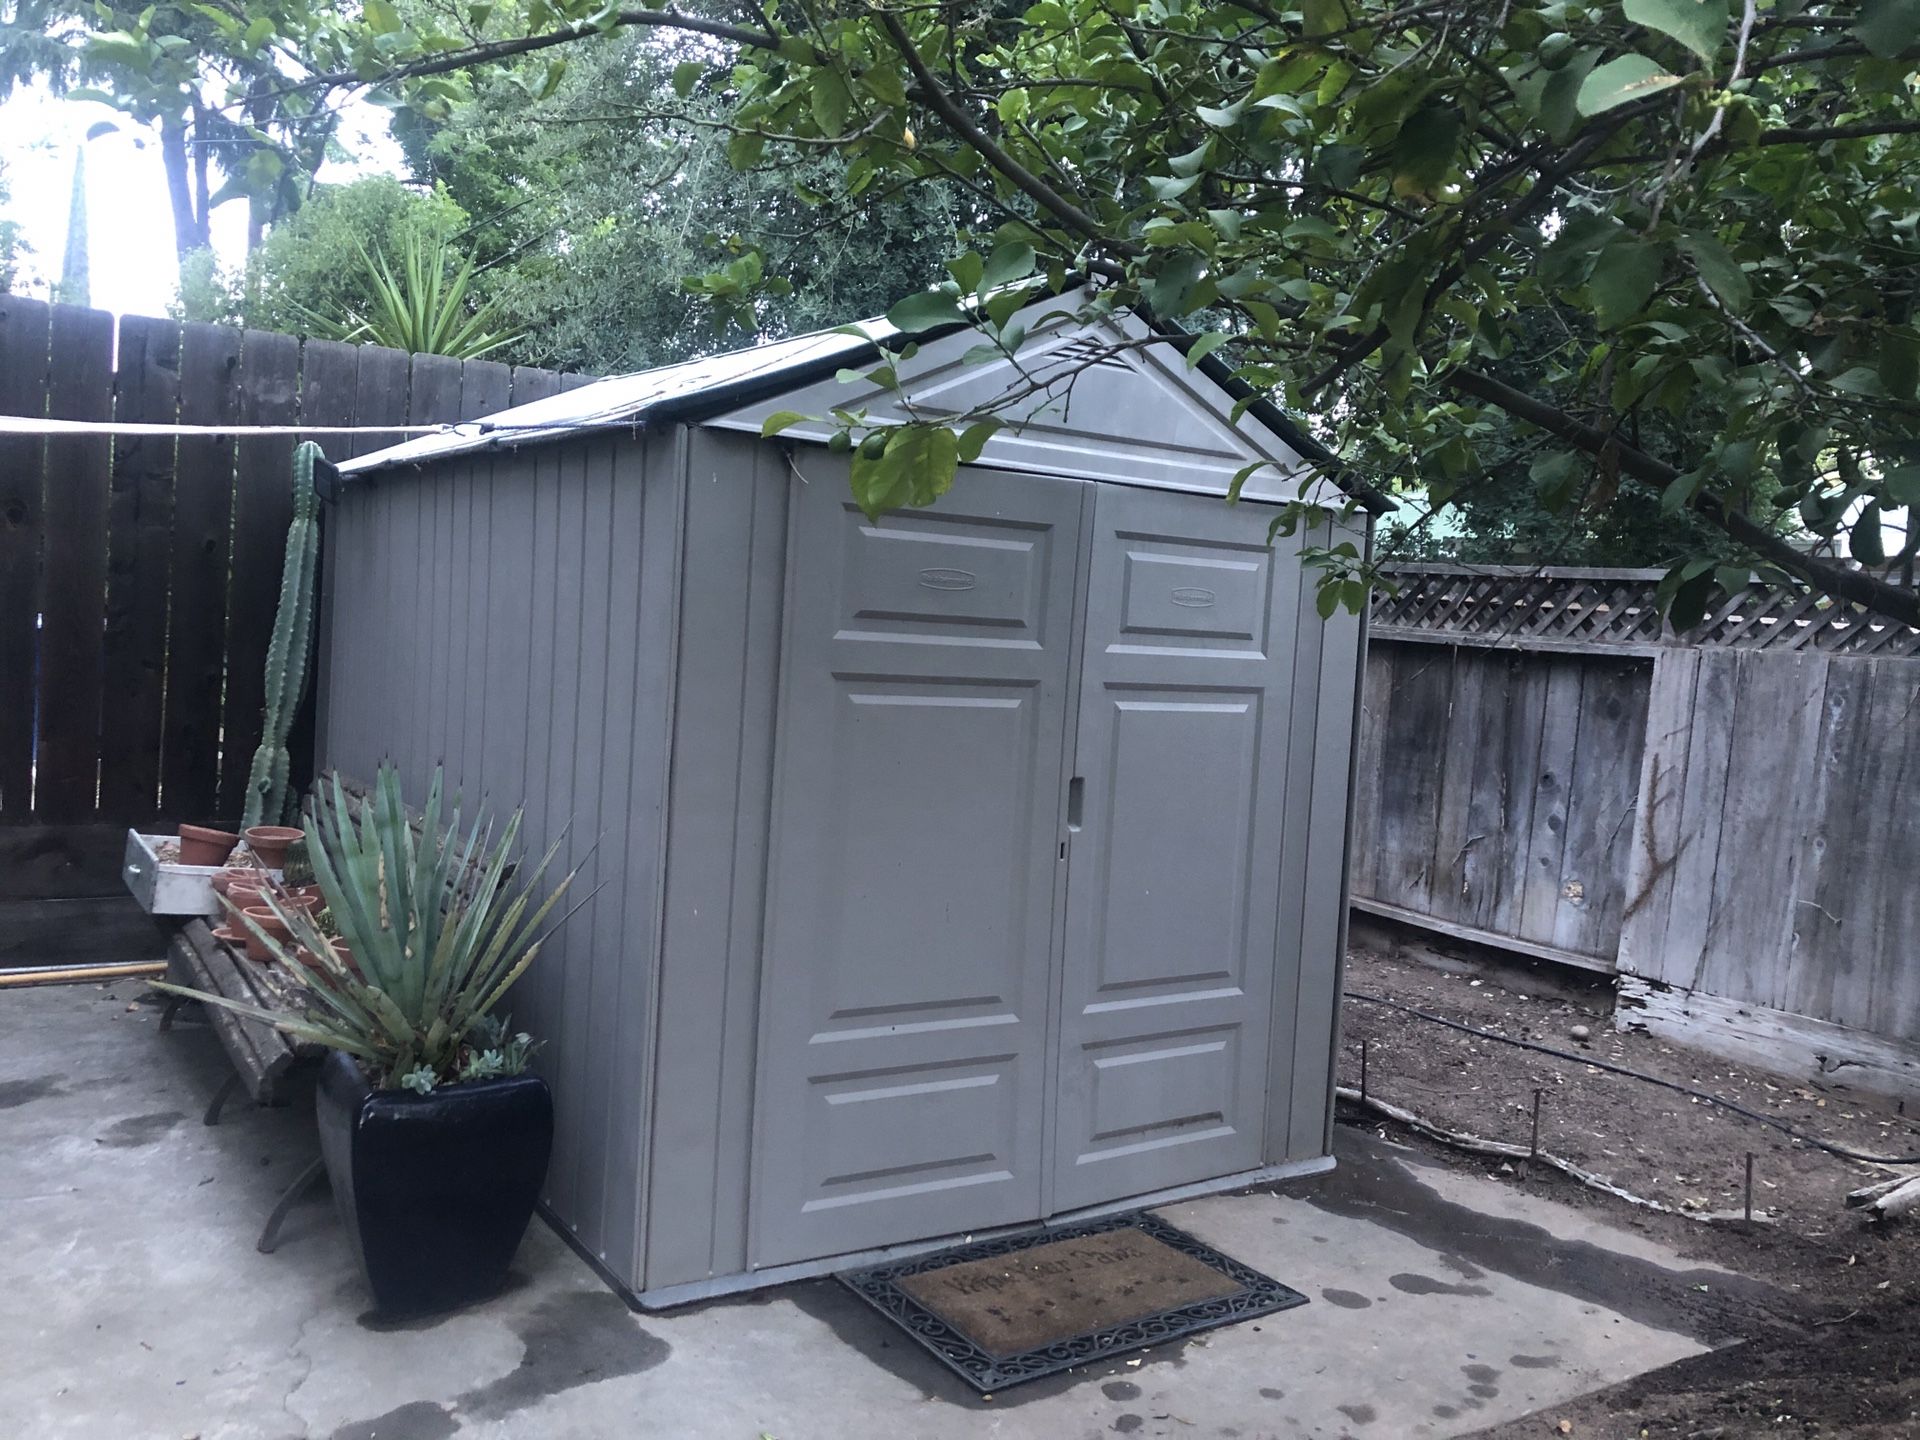 Rubbermaid shed, storage shed, tool shed